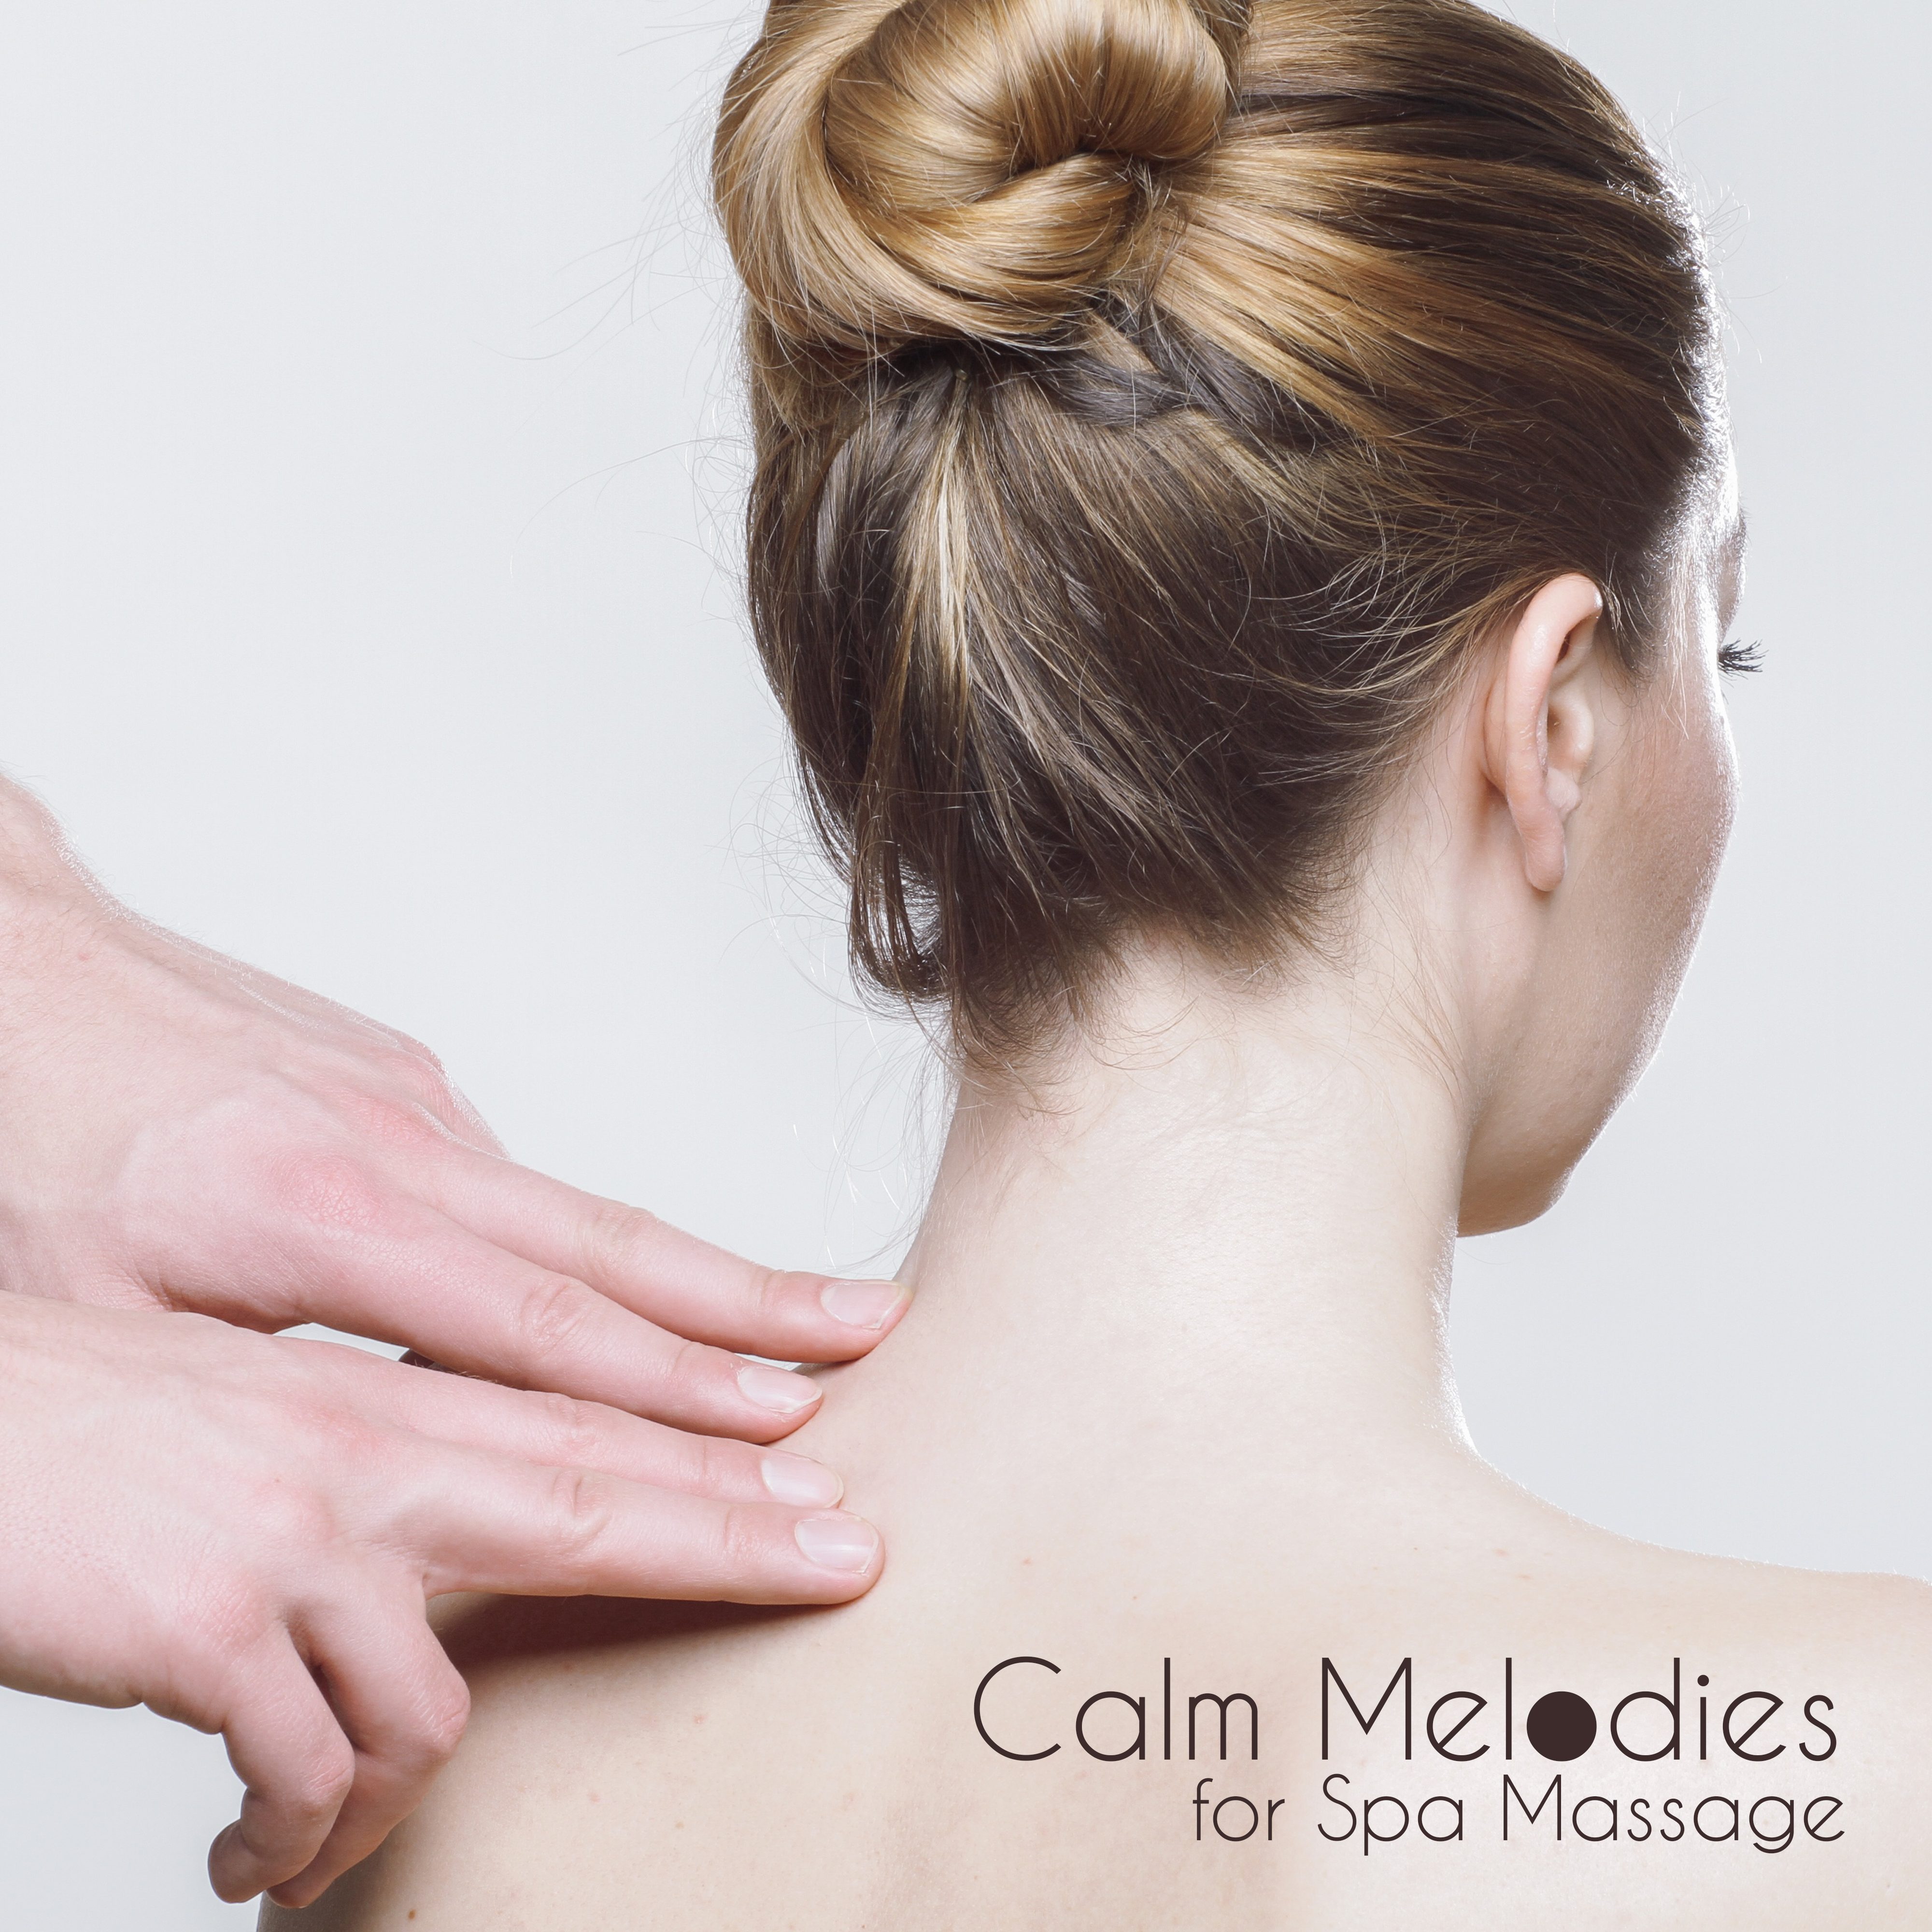 Calm Melodies for Spa Massage